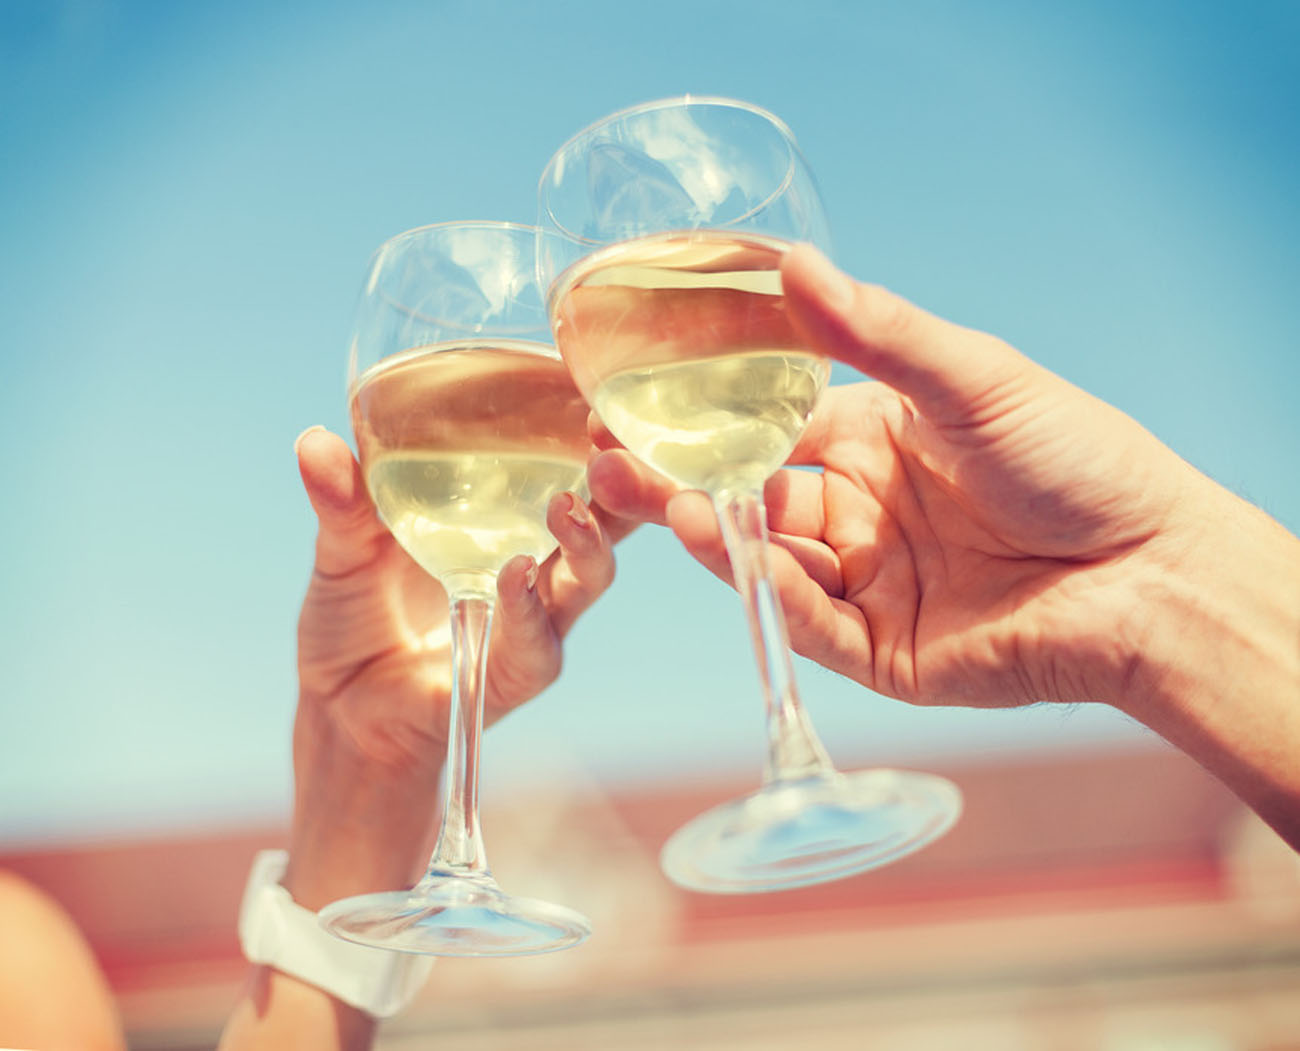 The secret to happy marriage? Drink more wine.